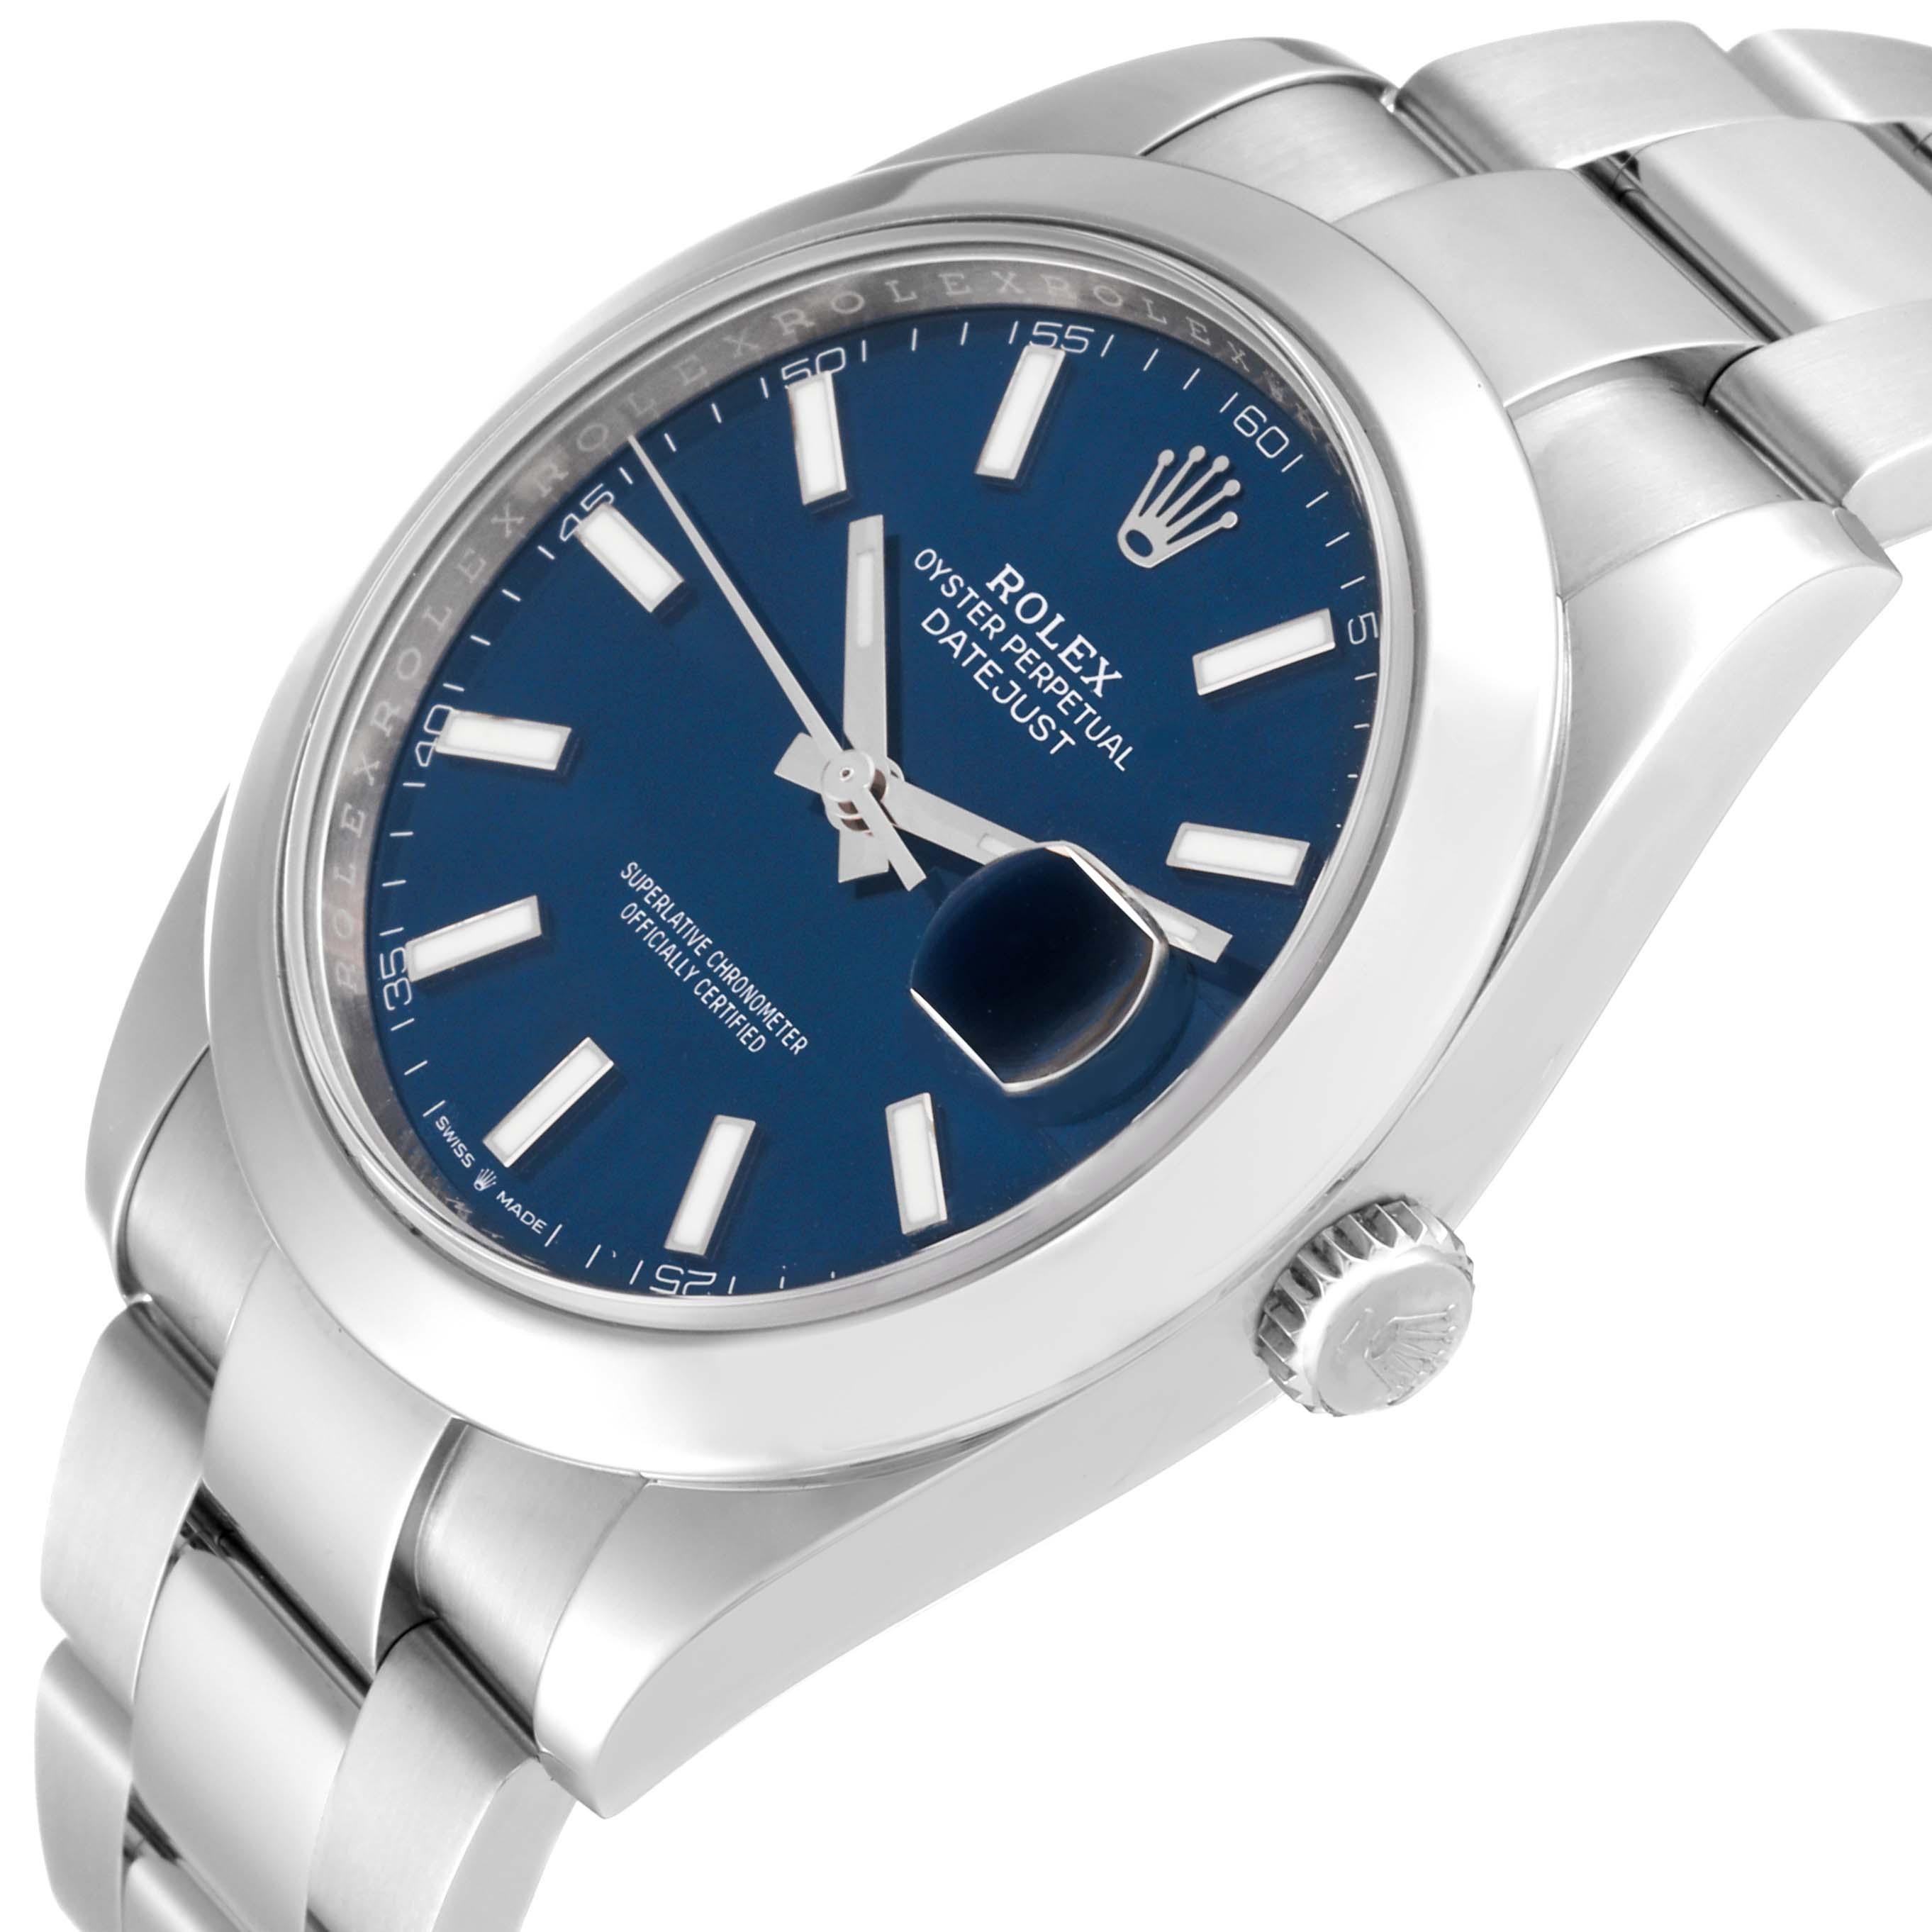 Rolex Datejust 41 Blue Dial Smooth Bezel Steel Mens Watch 126300. Officially certified chronometer automatic self-winding movement. Stainless steel case 41 mm in diameter. Rolex logo on the crown. Stainless steel smooth bezel. Scratch resistant